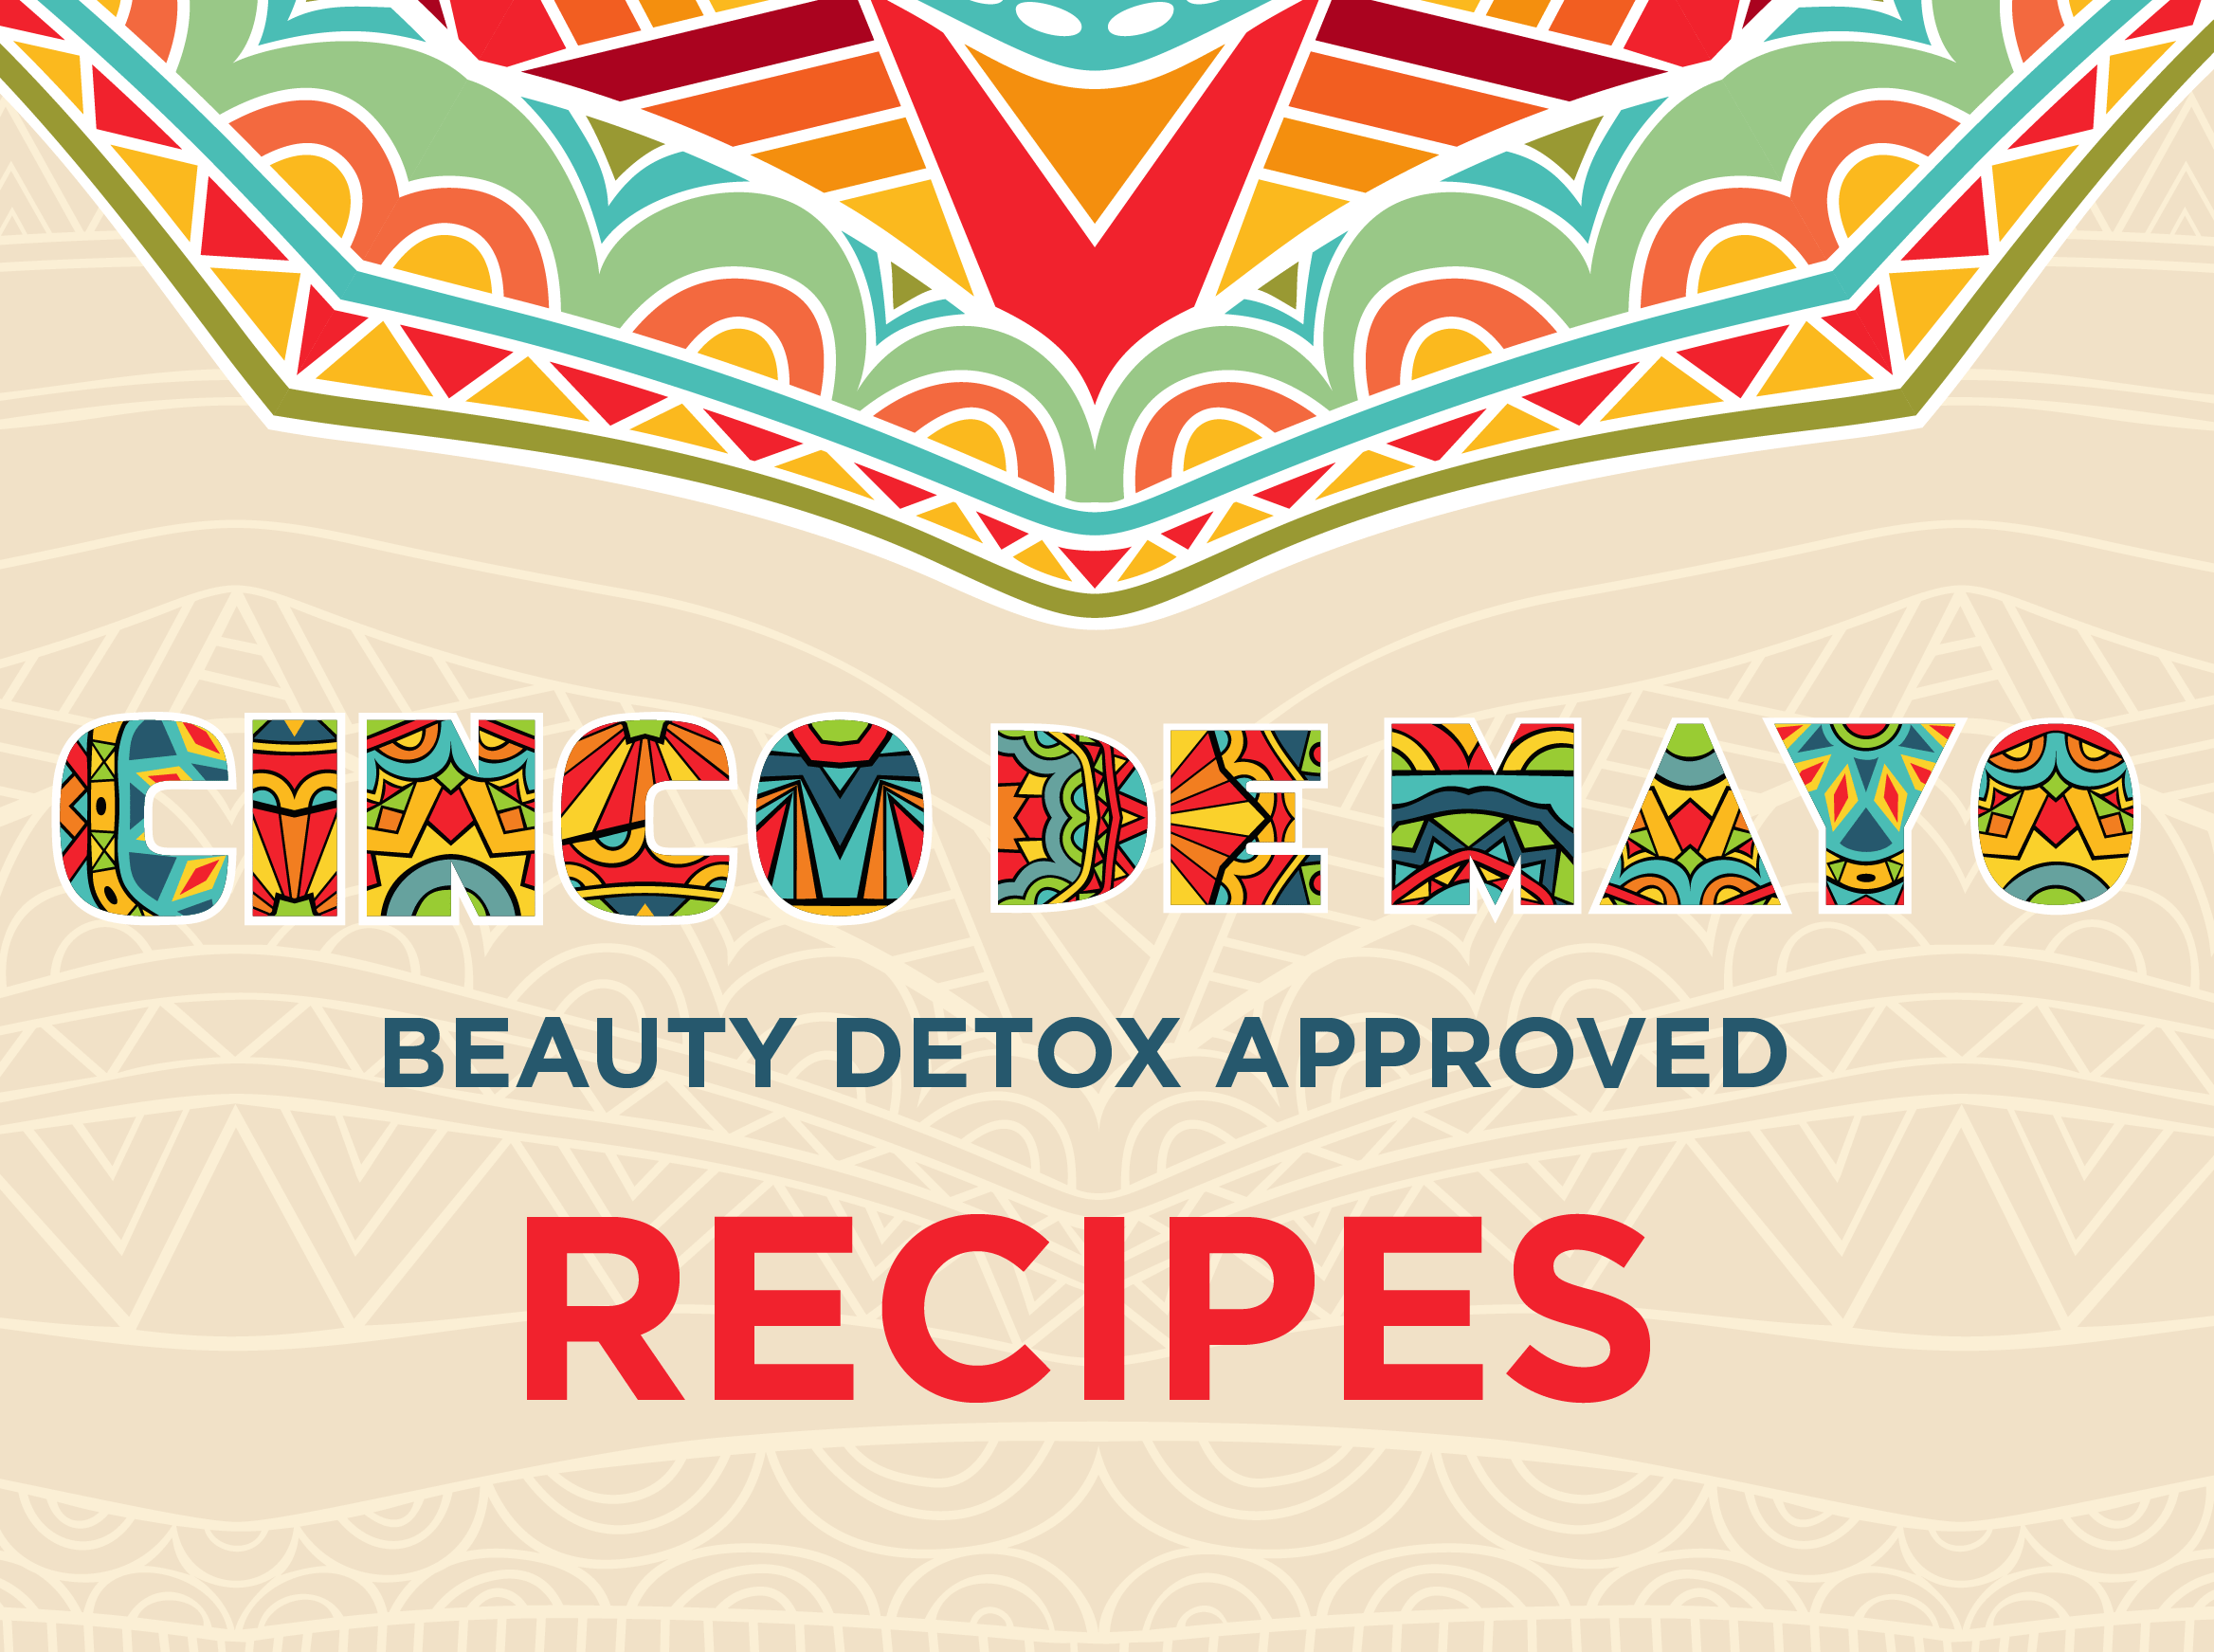 Create Your Own Guilt-Free Fiesta: Recipes for Cinco de Mayo